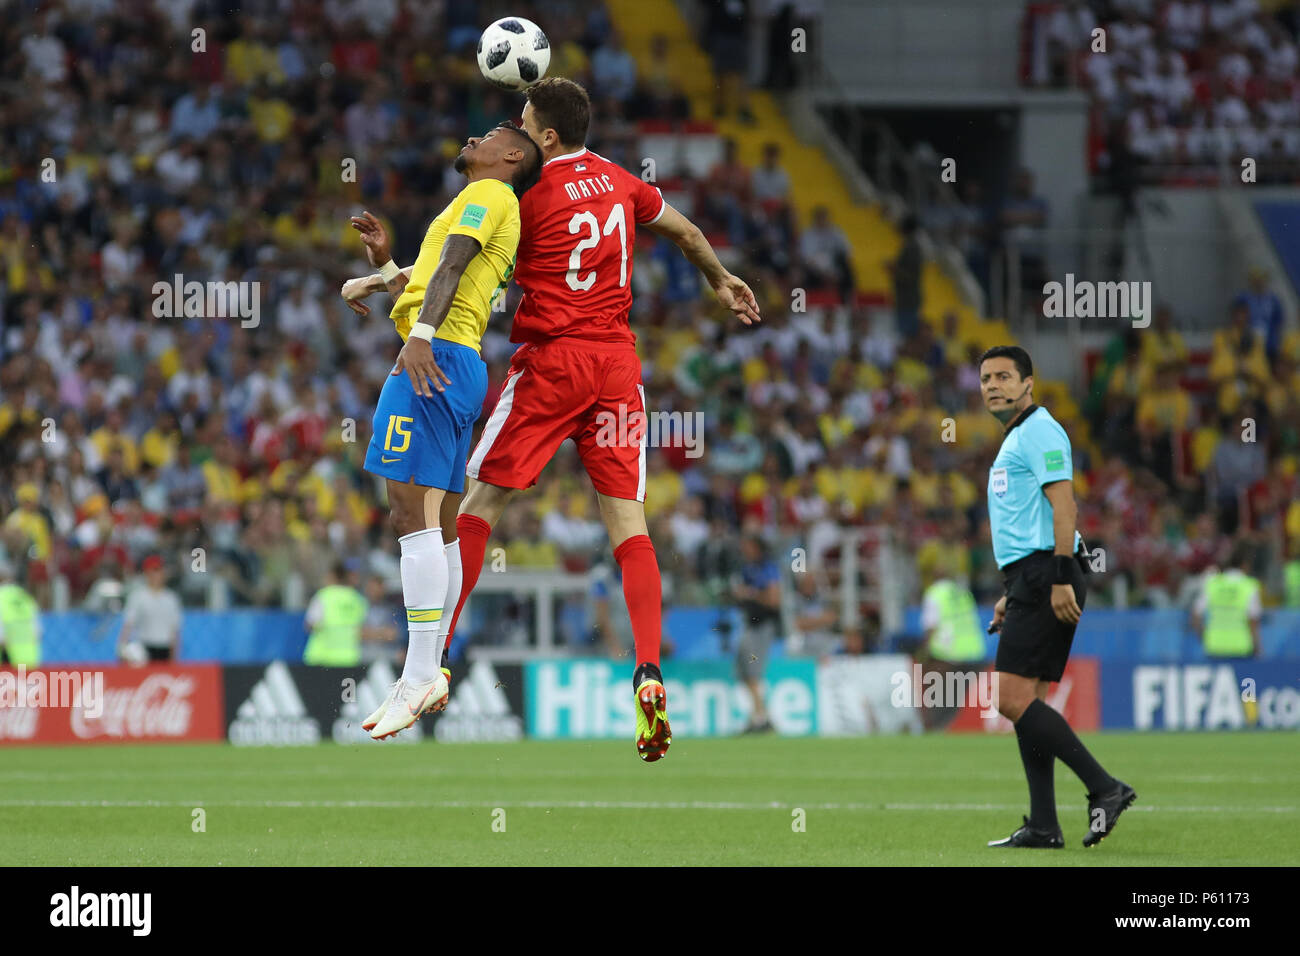 Moscow, Russia, 27 June 2018. SERBIA VS BRAZIL - Paulinho and Nemanja Matic during the match between Serbia and Brazil valid for the 2018 World Cup held at the Otkrytie Arena (Spartak) in Moscow, Russia. (Photo: Ricardo Moreira/Fotoarena) Credit: Foto Arena LTDA/Alamy Live News Stock Photo